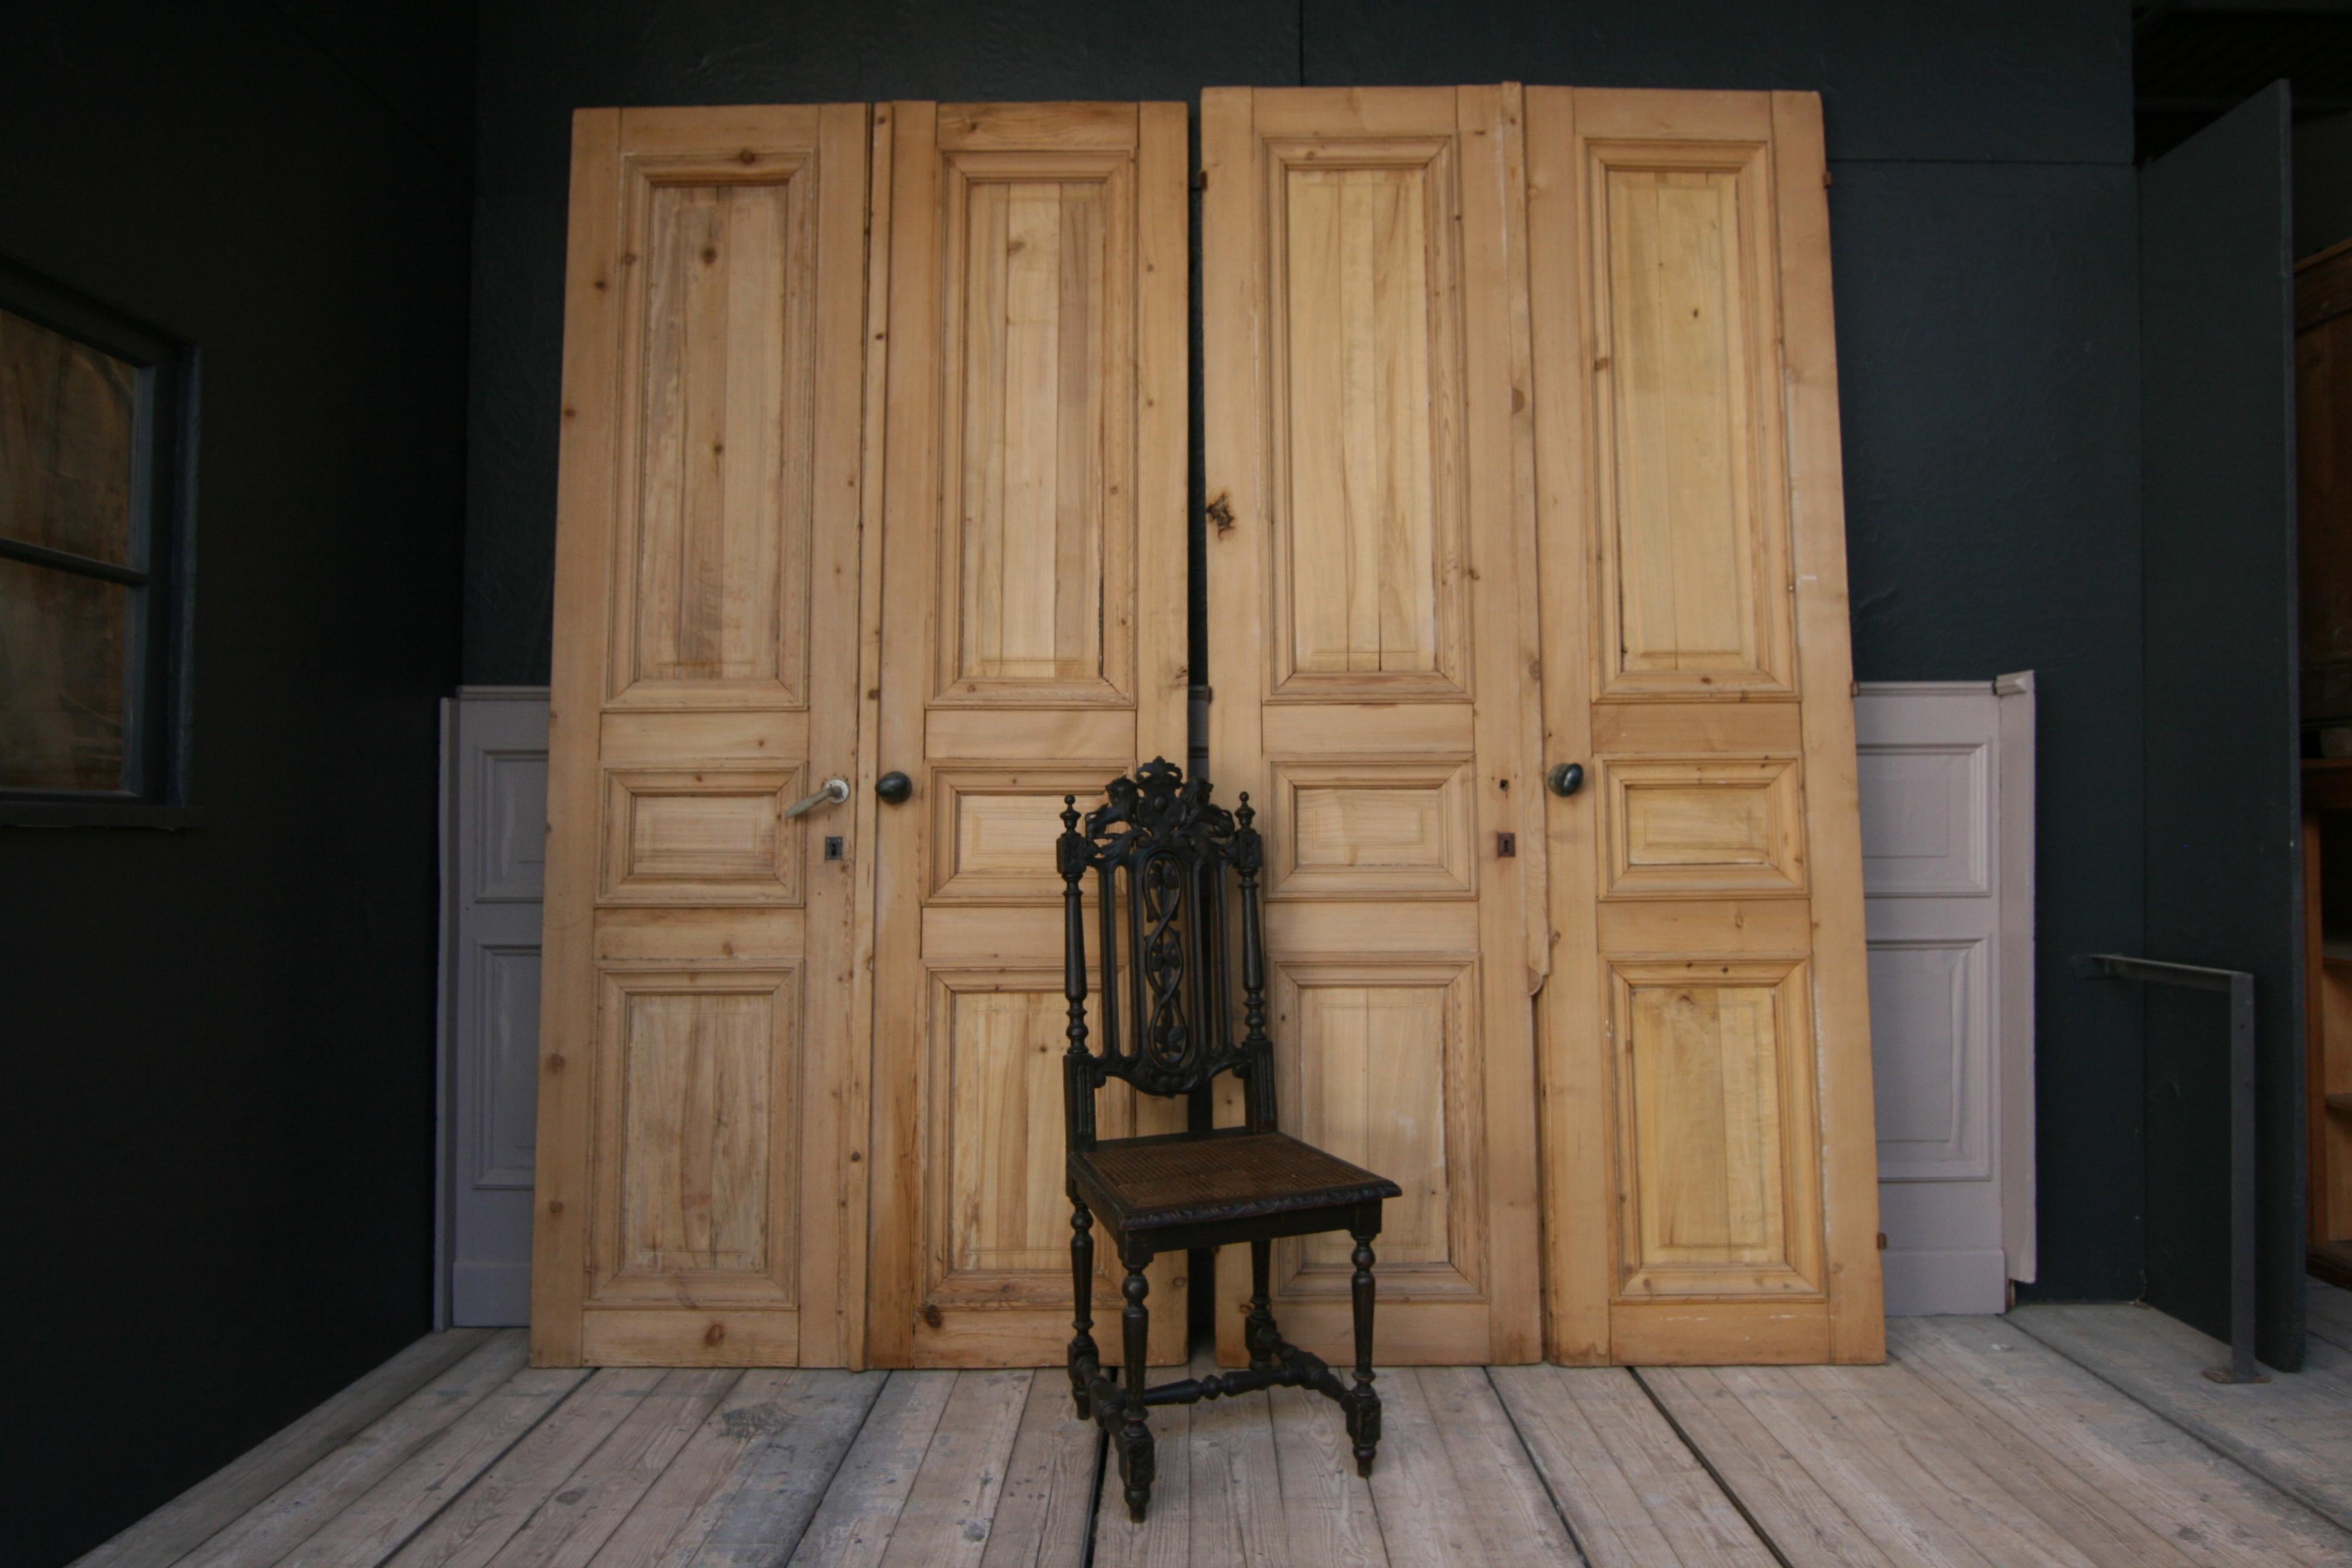 Two 19th century French double doors (= total of 4 single doors in a set), formerly from a hotel in Paris. Solidly made of pine wood and freed from old paint (bleached wood).

Dimensions: 
250 cm high / 98.42 inch high,
64 cm (single door) or